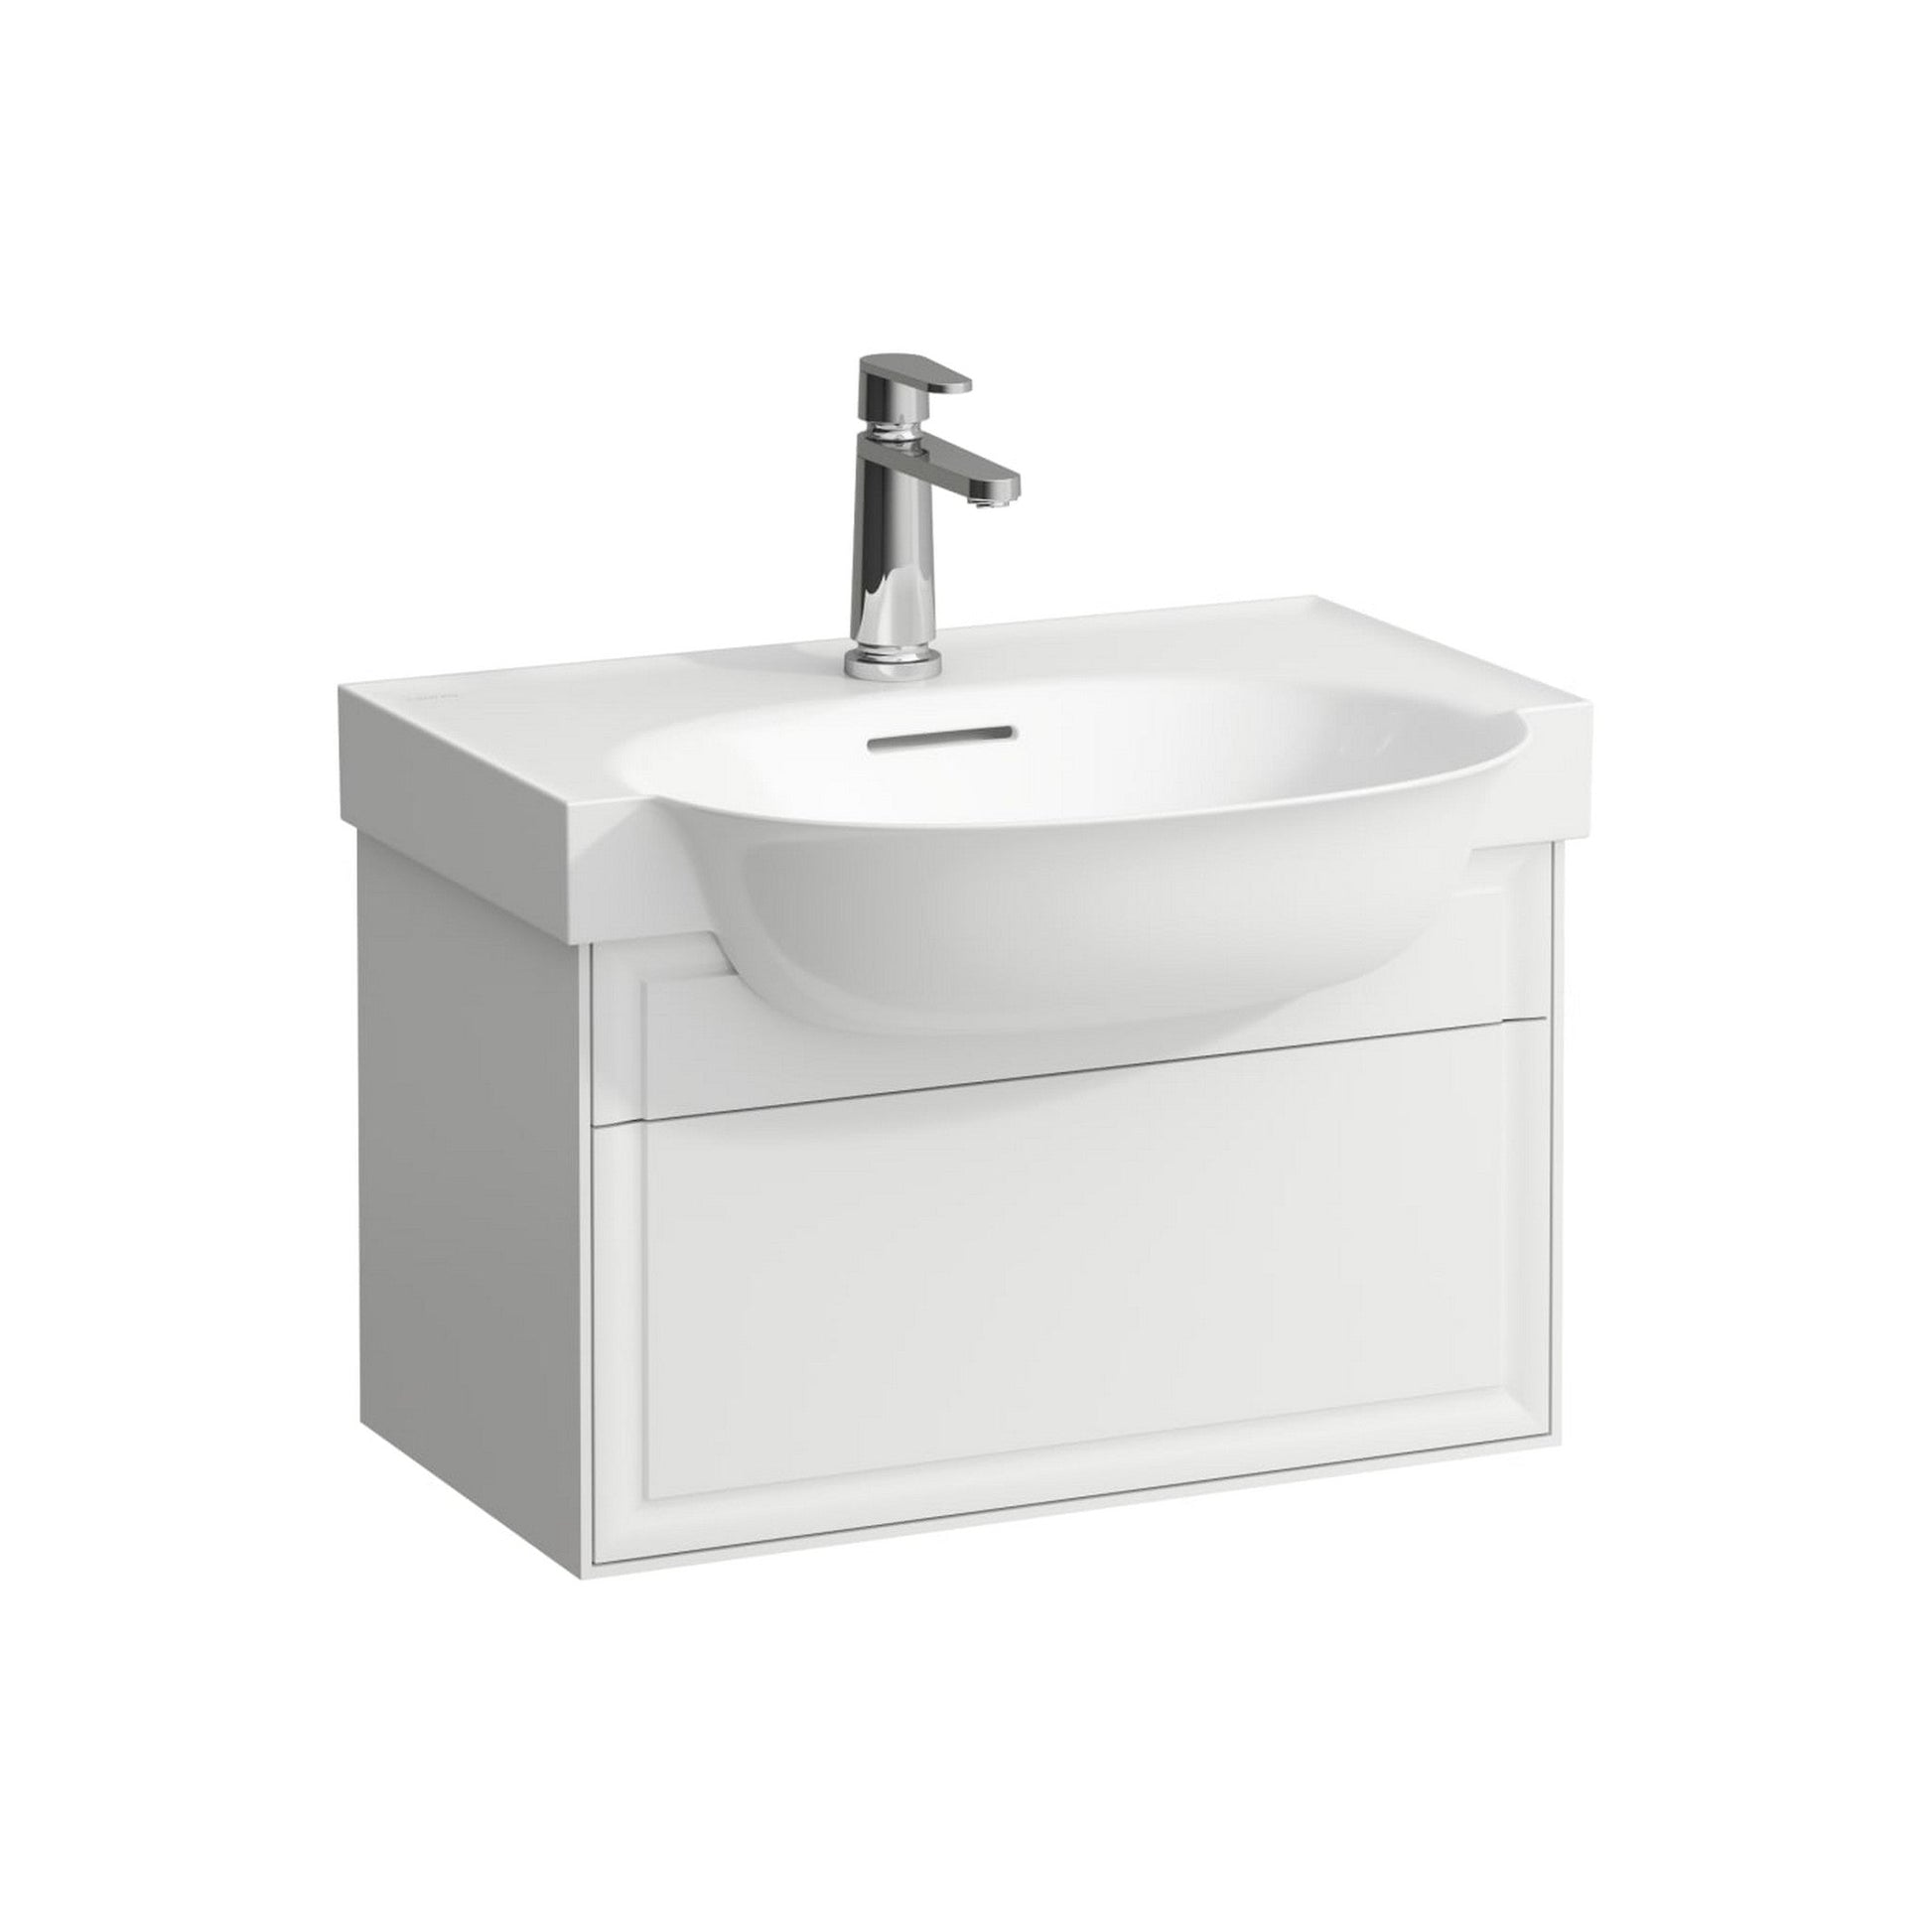 Laufen New Classic 23" 1-Drawer White Wall-Mounted Vanity for New Classic Bathroom Sink Model: H813853